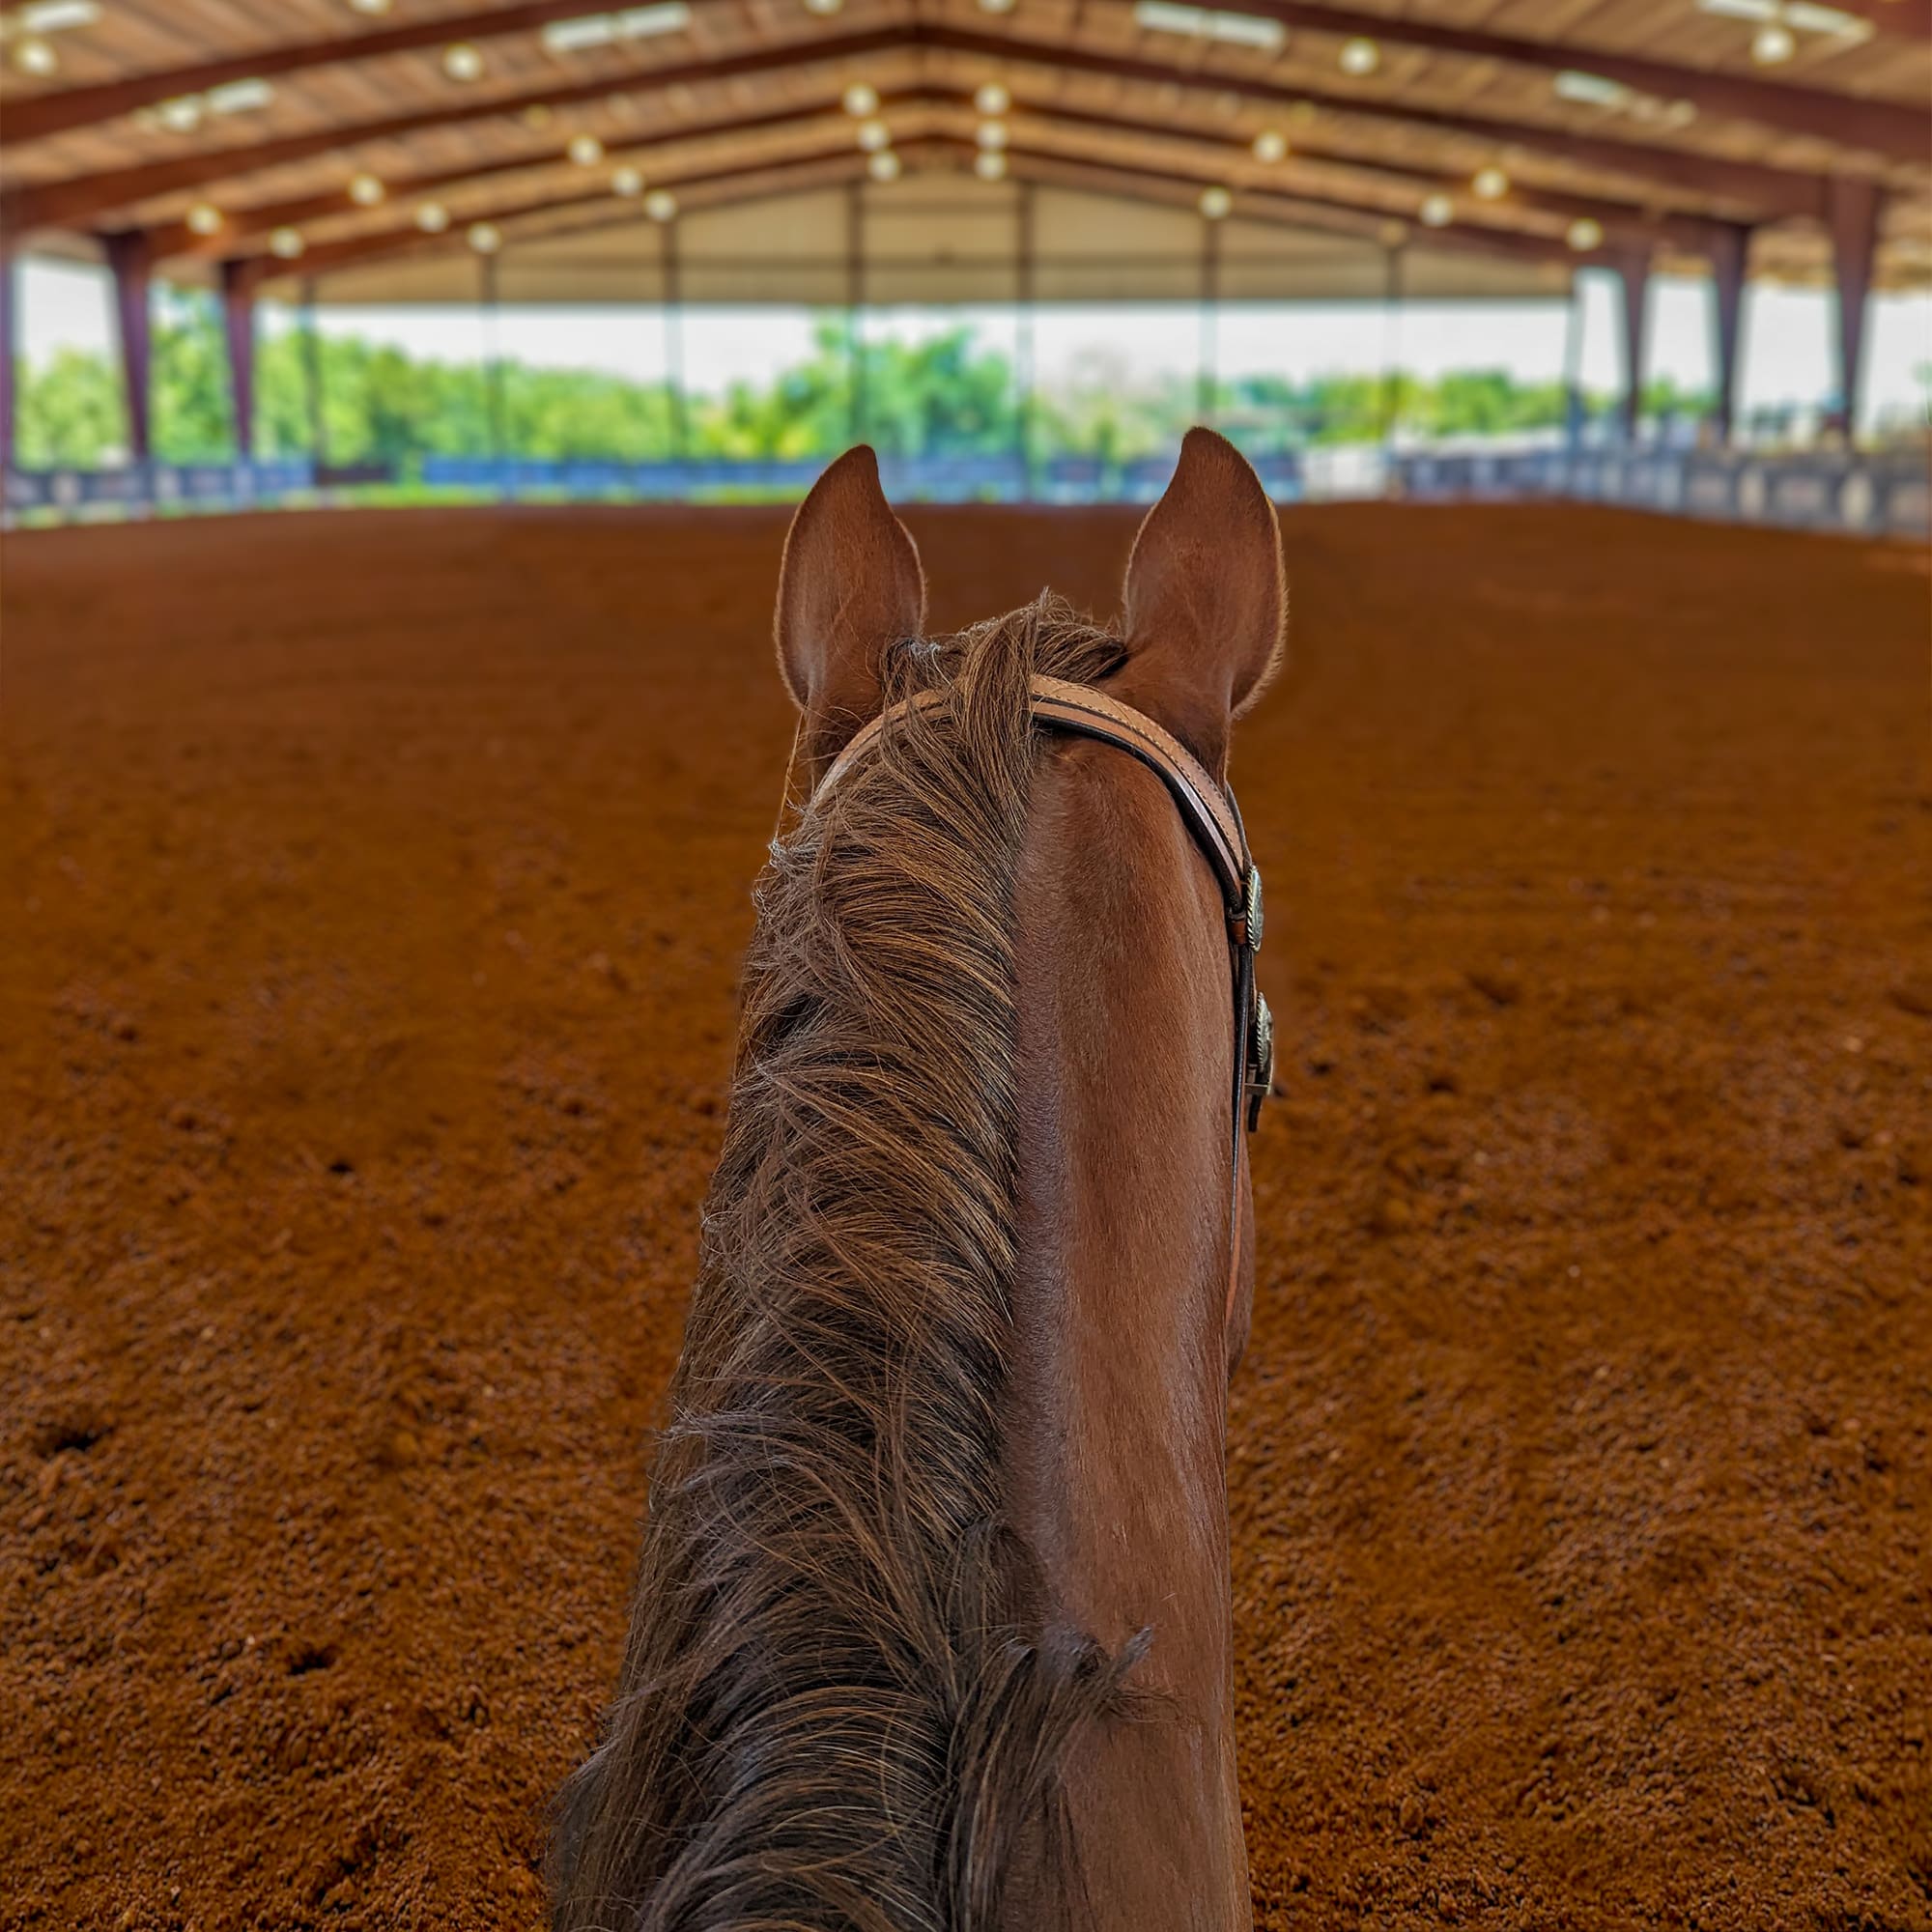 View of an arena through a horse's ears.